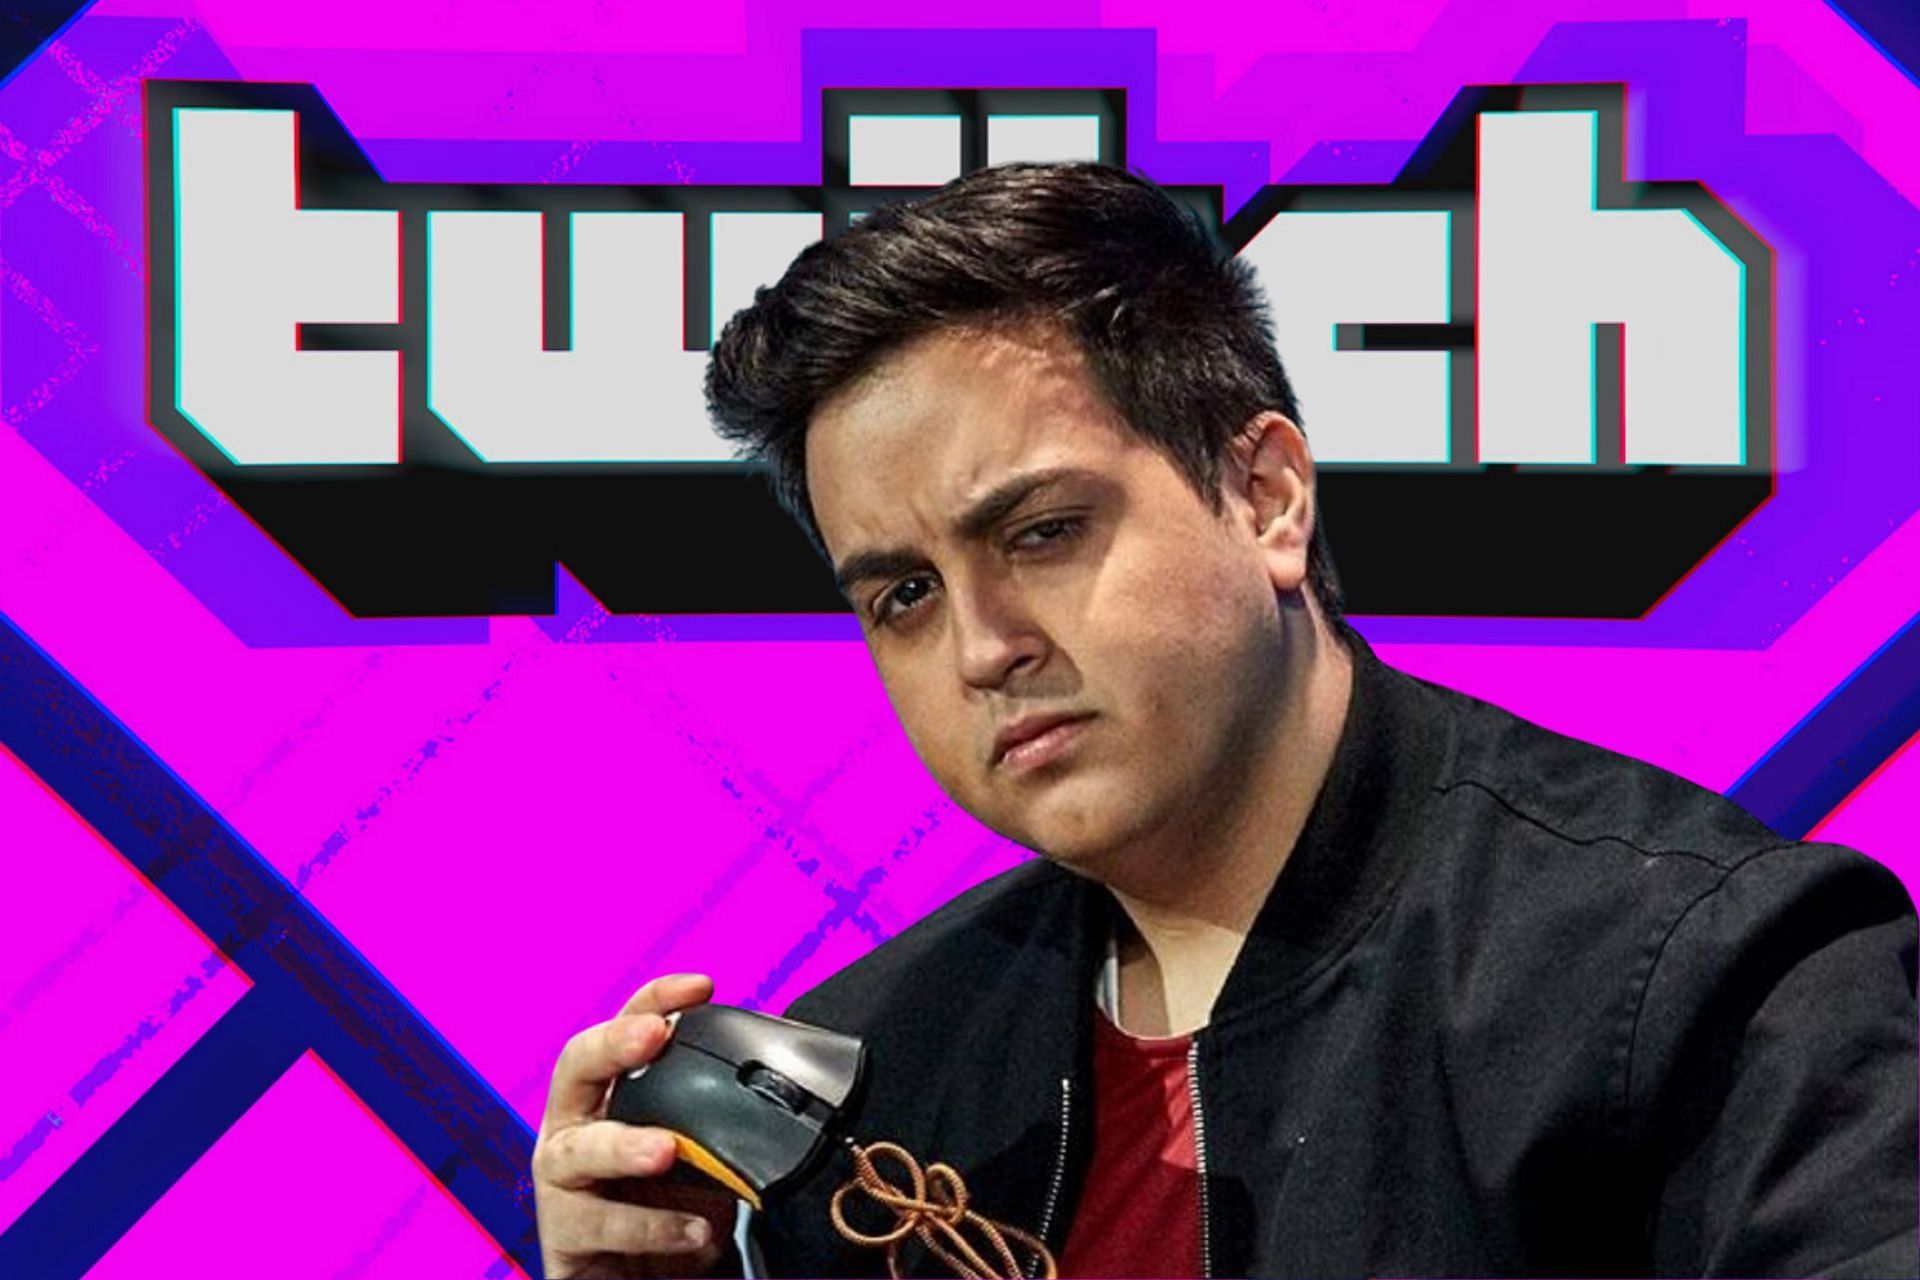 Pokelawls was stunned after his interview was cut off from Streamer Awards on YouTube (Image via Sportskeeda)